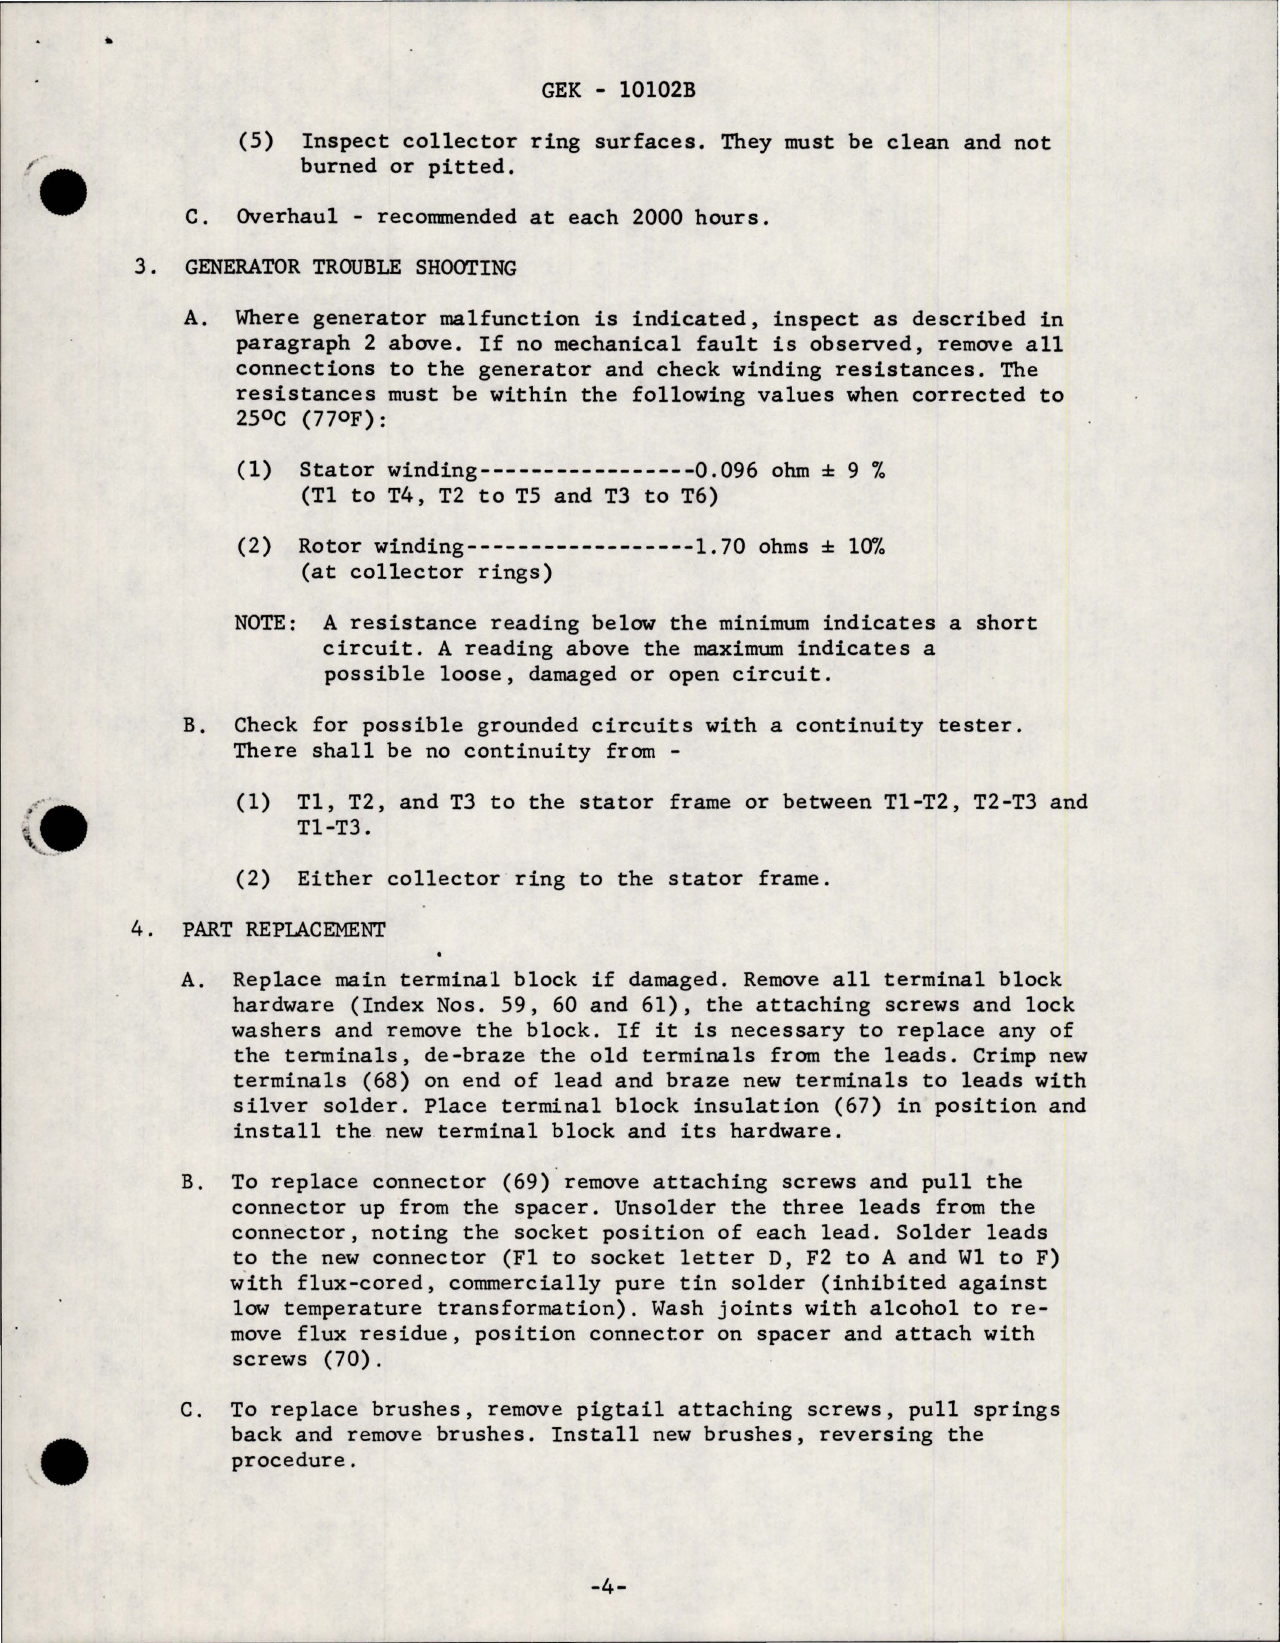 Sample page 7 from AirCorps Library document: Instructional Manual for AC Generator - Models 2CM370A1, 2CM370D1, 2CM370D1A, 2CM370D2 and 2CM370D2A